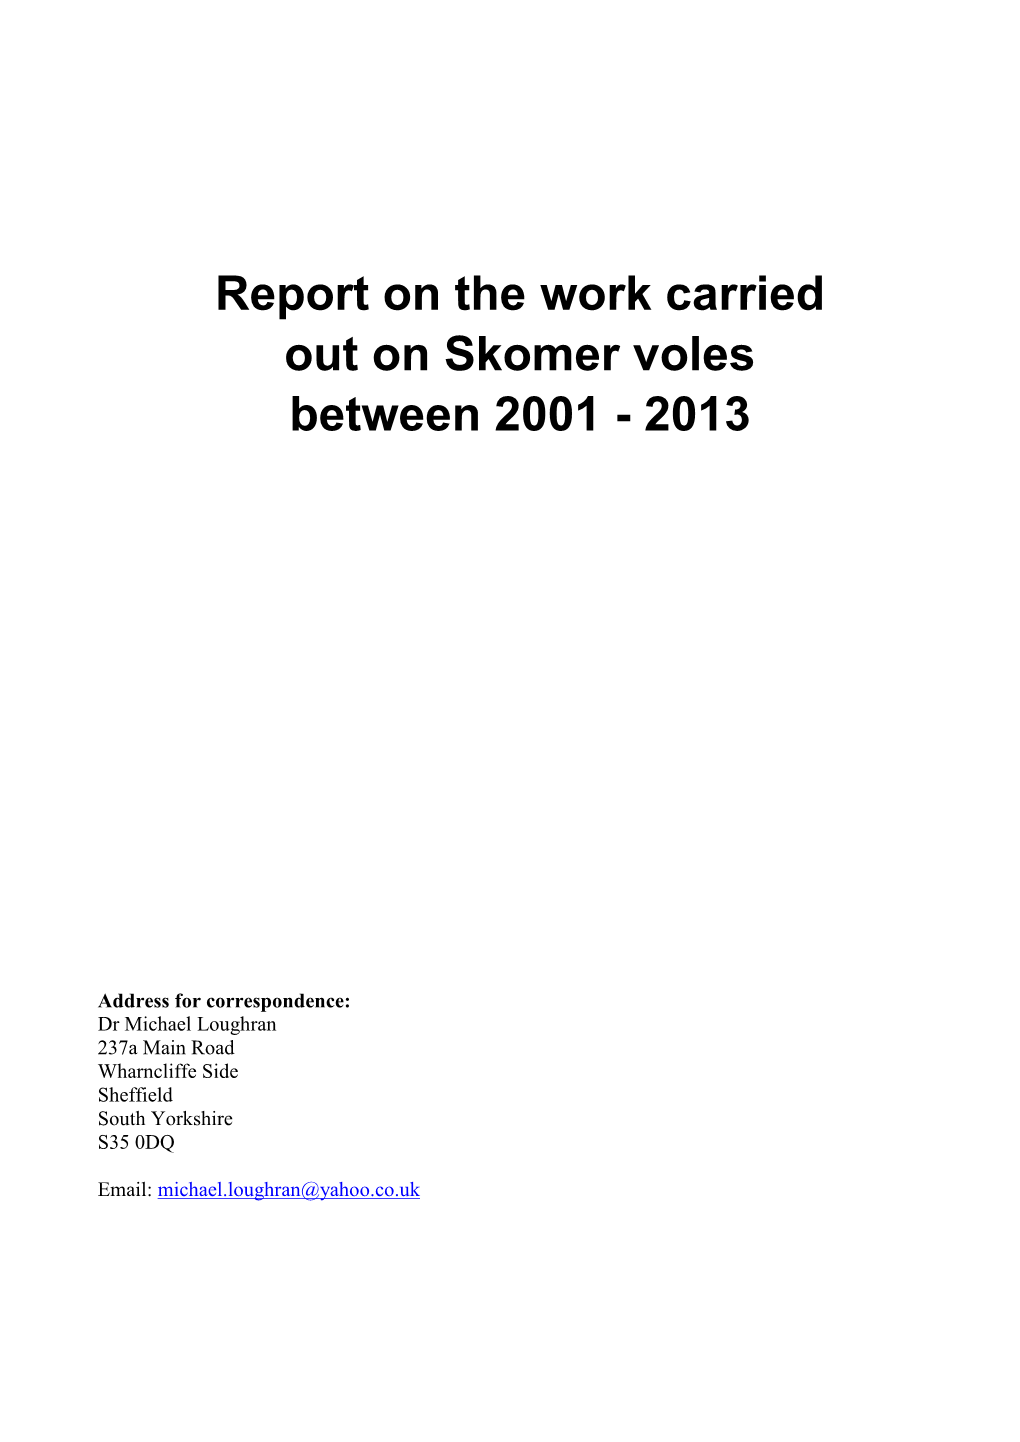 Report on the Work Carried out on Skomer Voles Between 2001 - 2013